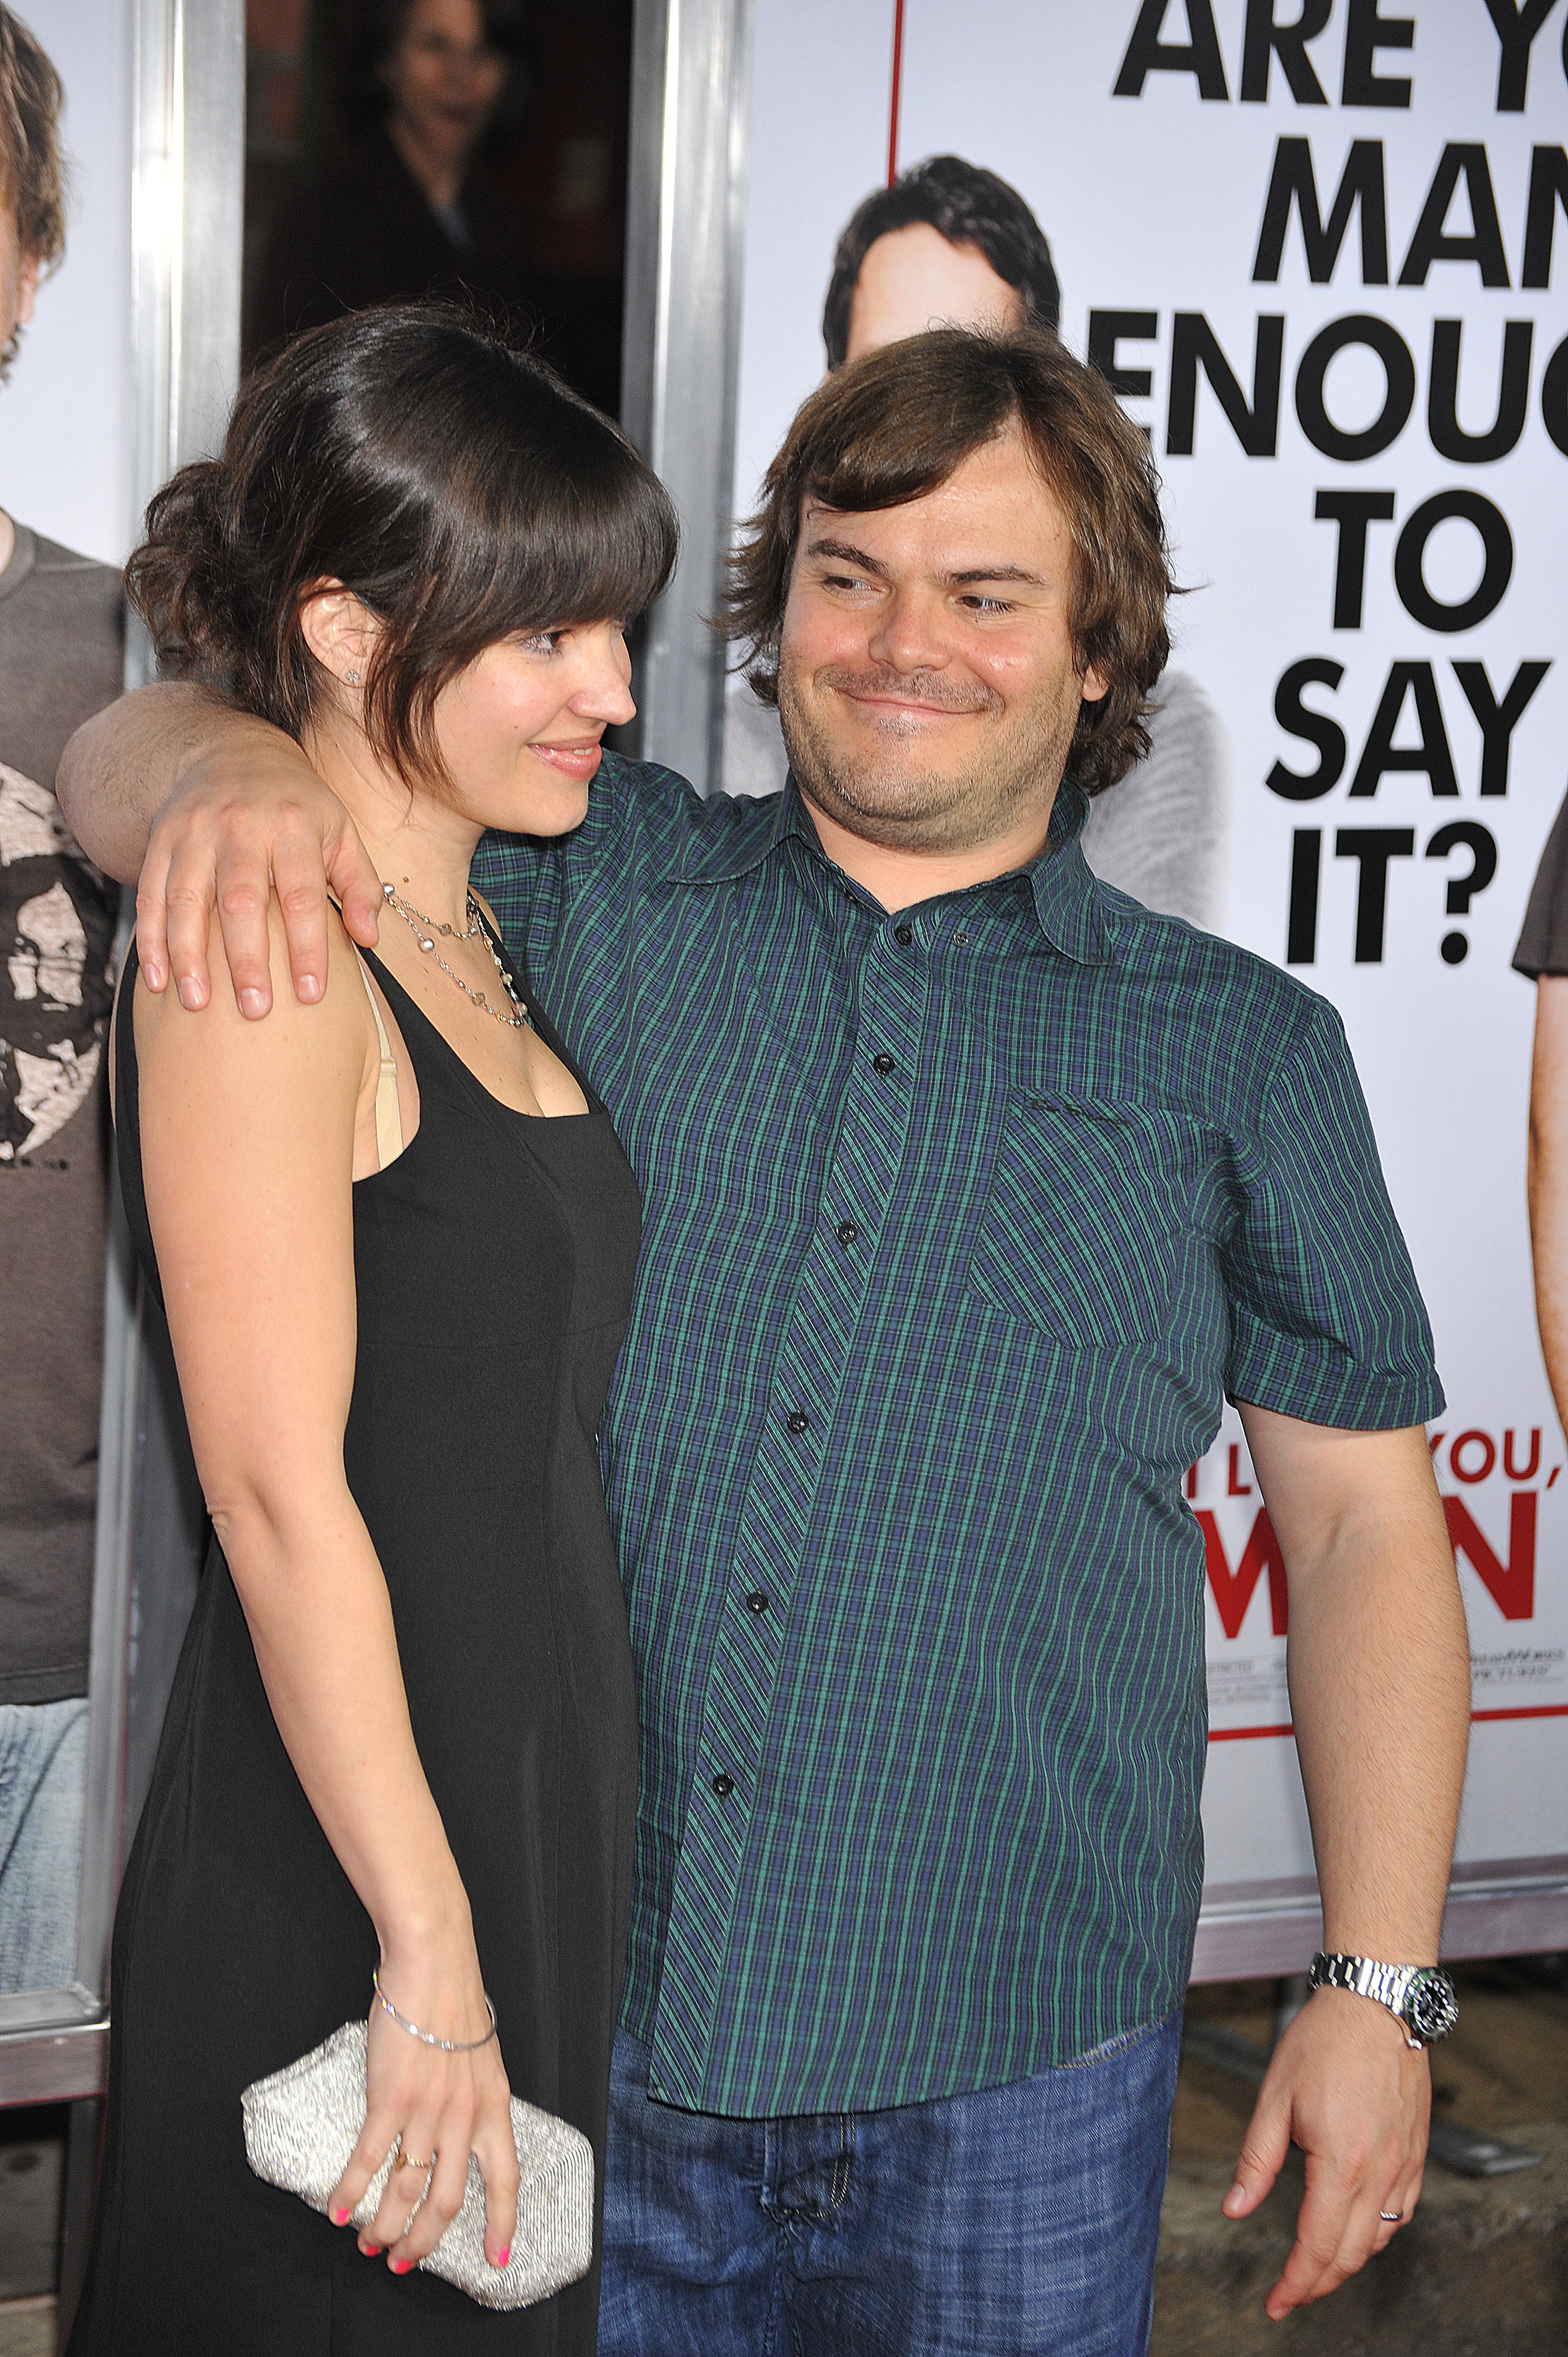 Jack Black and wife arrive at the premiere of "I Love You, Man" held at Mann's Village Theater in Westwood on March 17, 2009 | Source: Getty Images